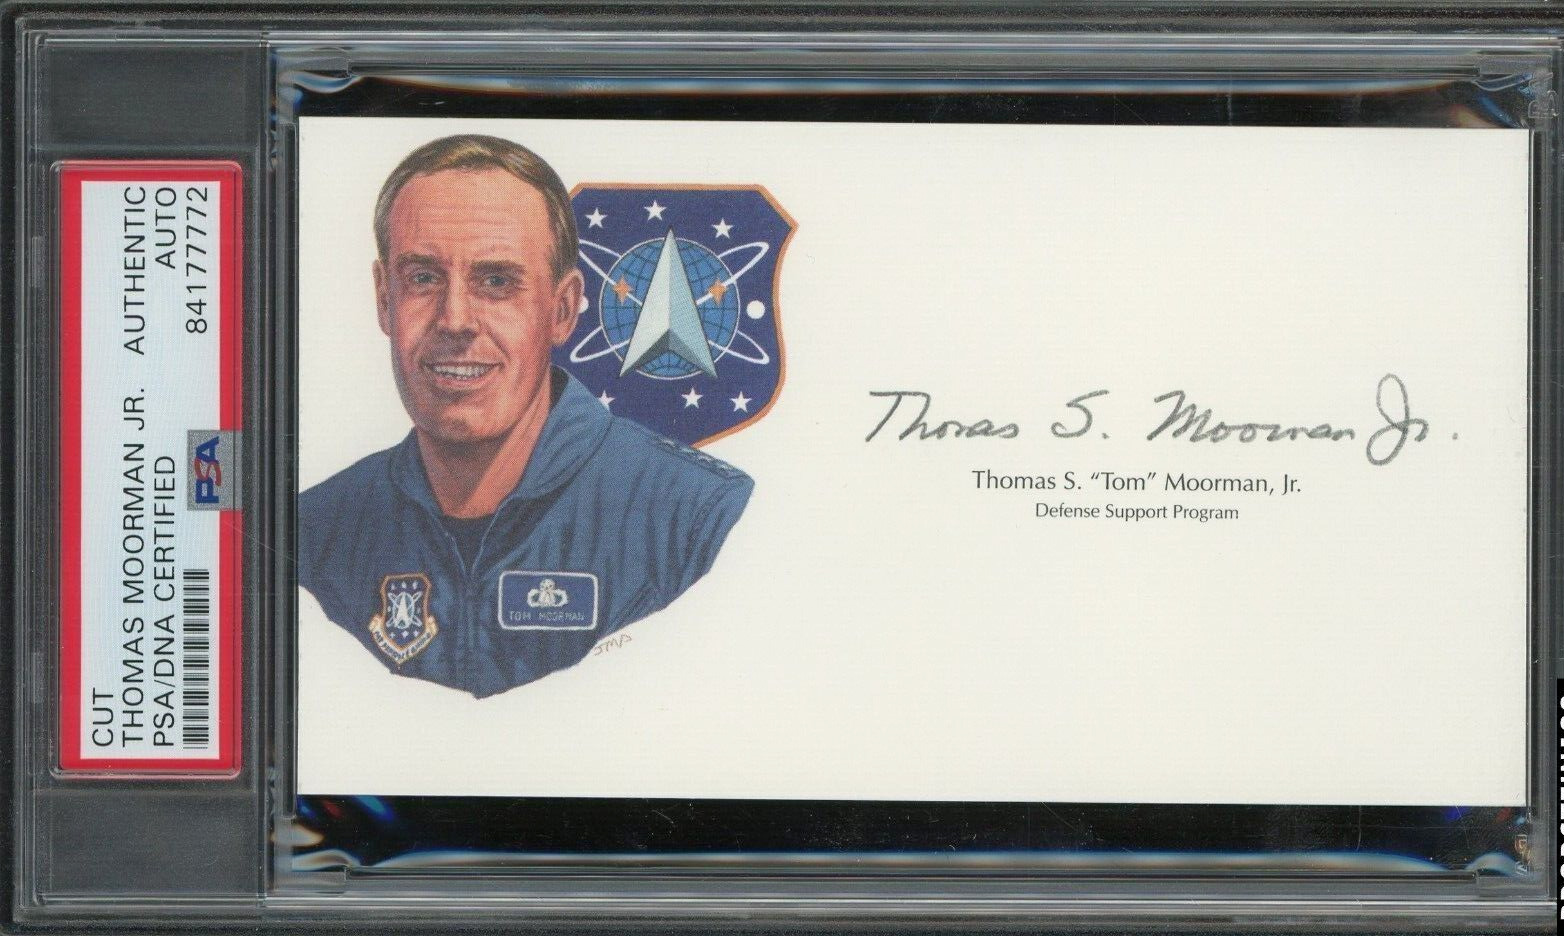 THOMAS MOORMAN JR 4 STAR GEN. 1st AIRFORCE SPACE COMMAND OFC SIGNED PSA DNA 2020